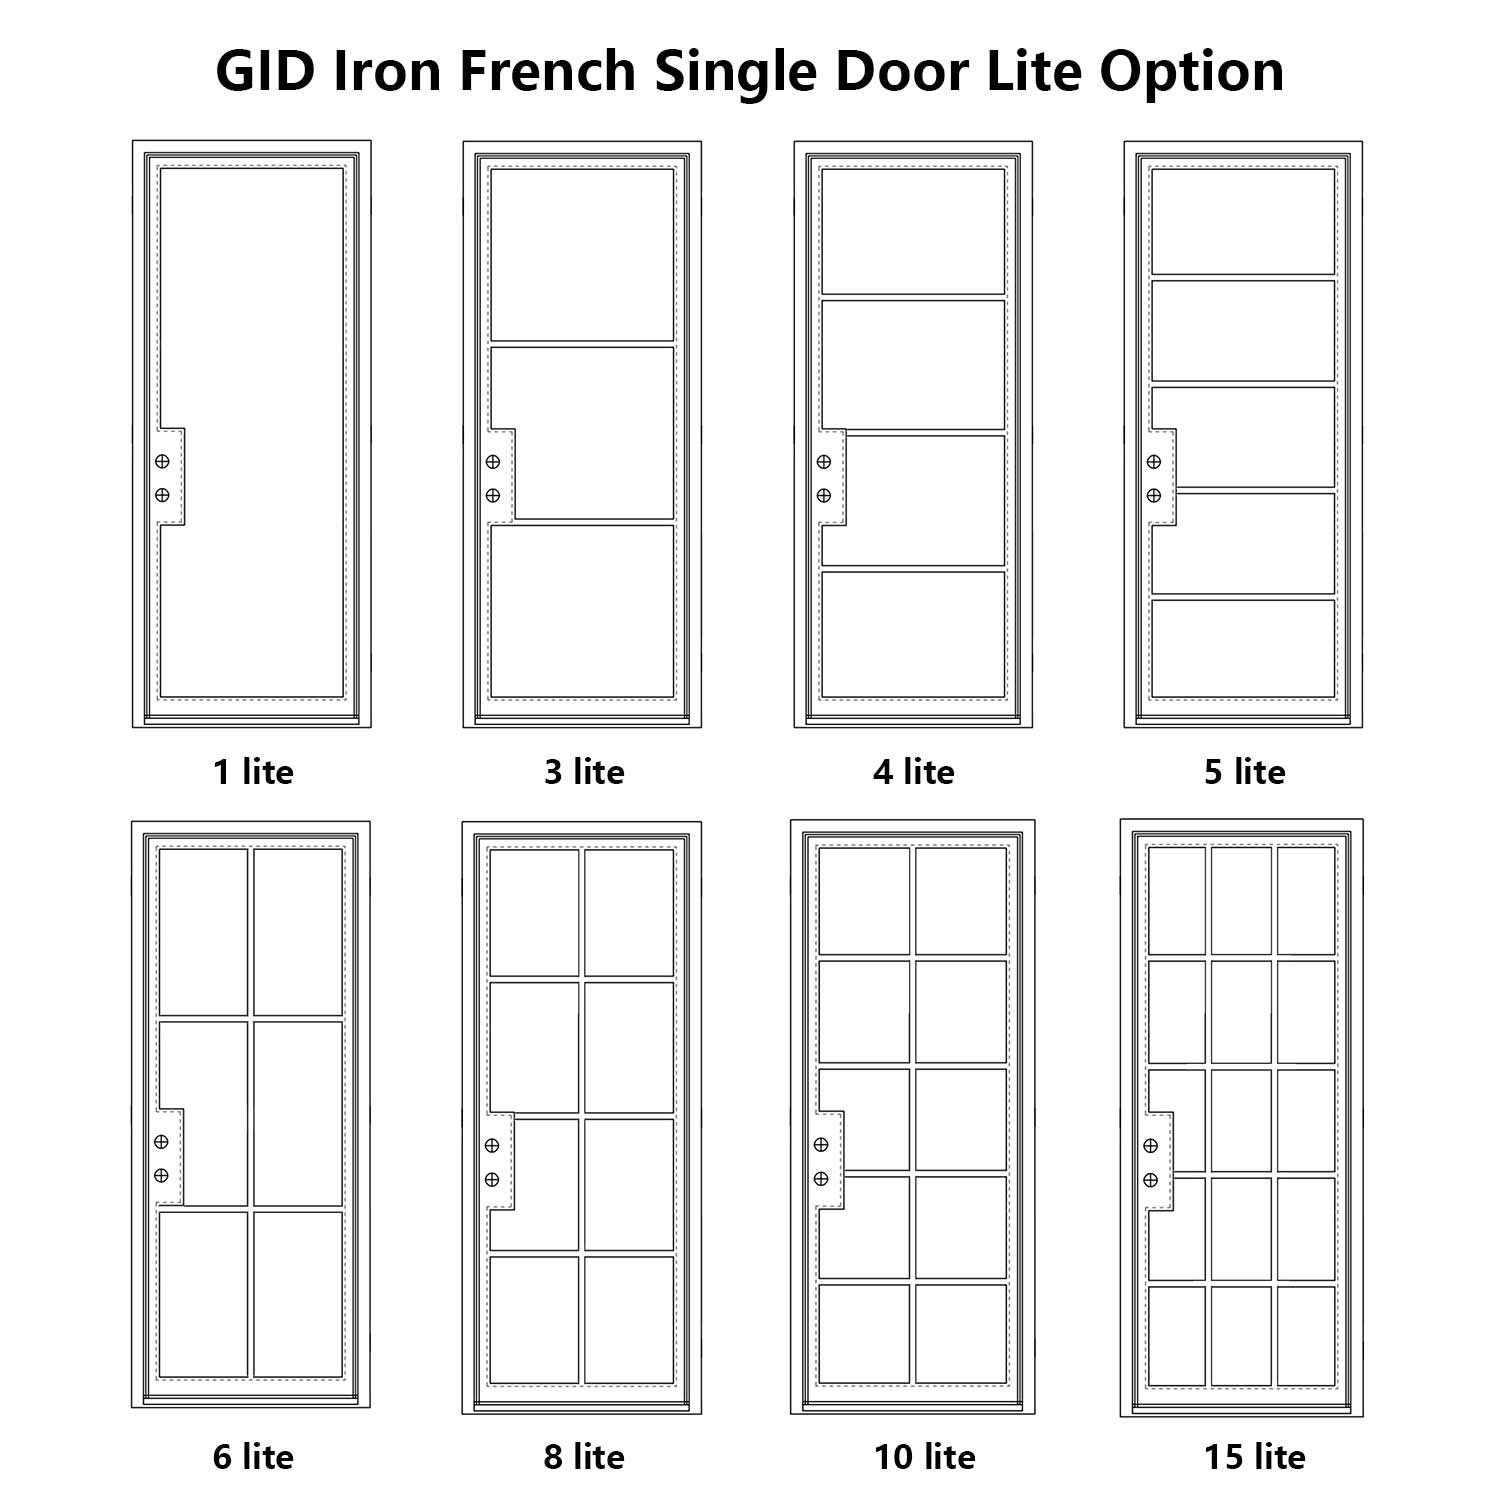 GID Square Iron French Double Door With Sidelights and Transom FD031